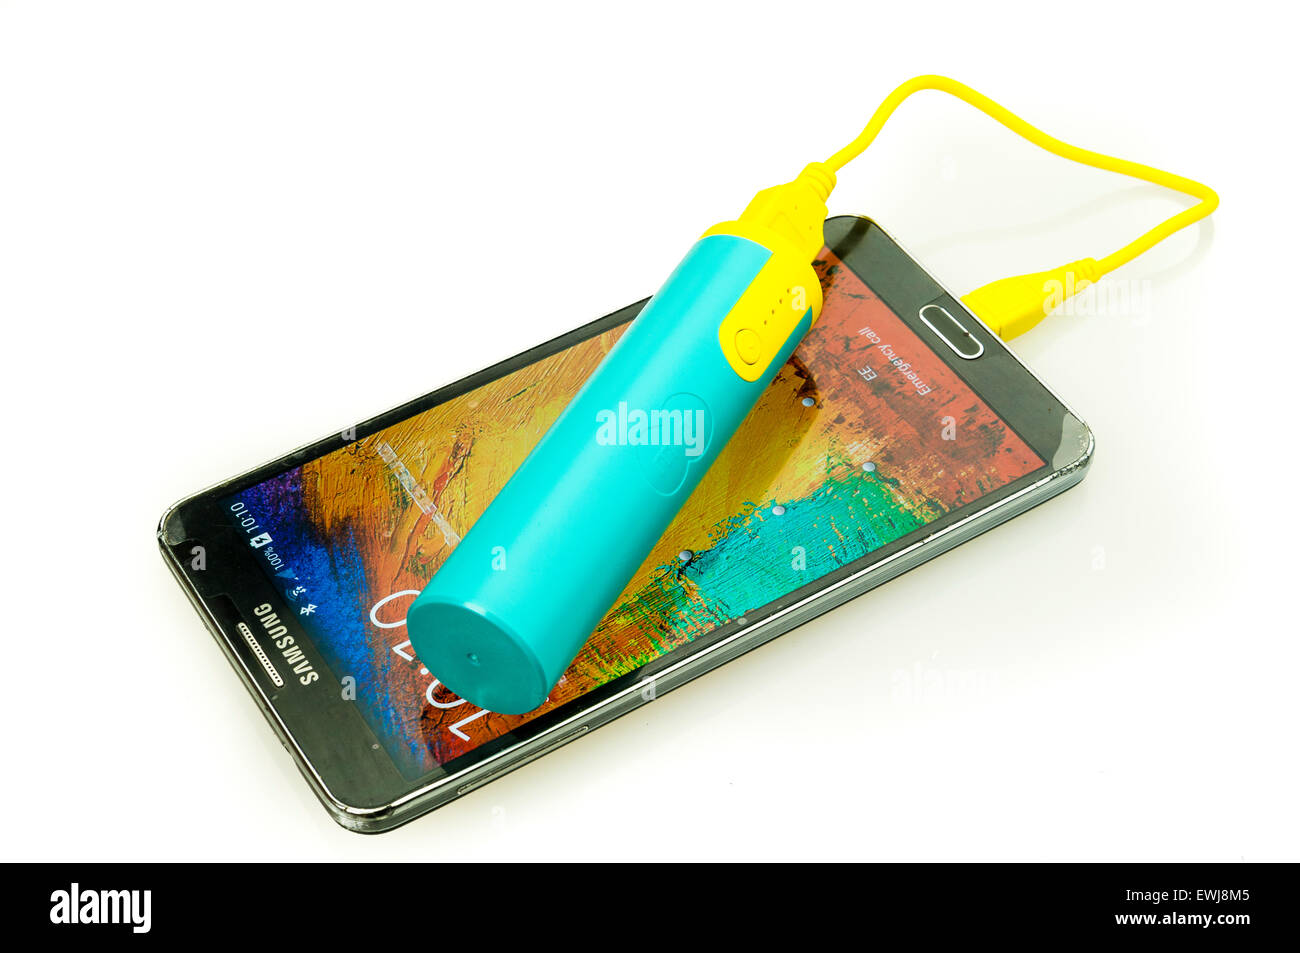 EE Power Bar mobile phone recharger, which were given free to customers.  In 2015, EE recalled all devices due to a fire hazard Stock Photo